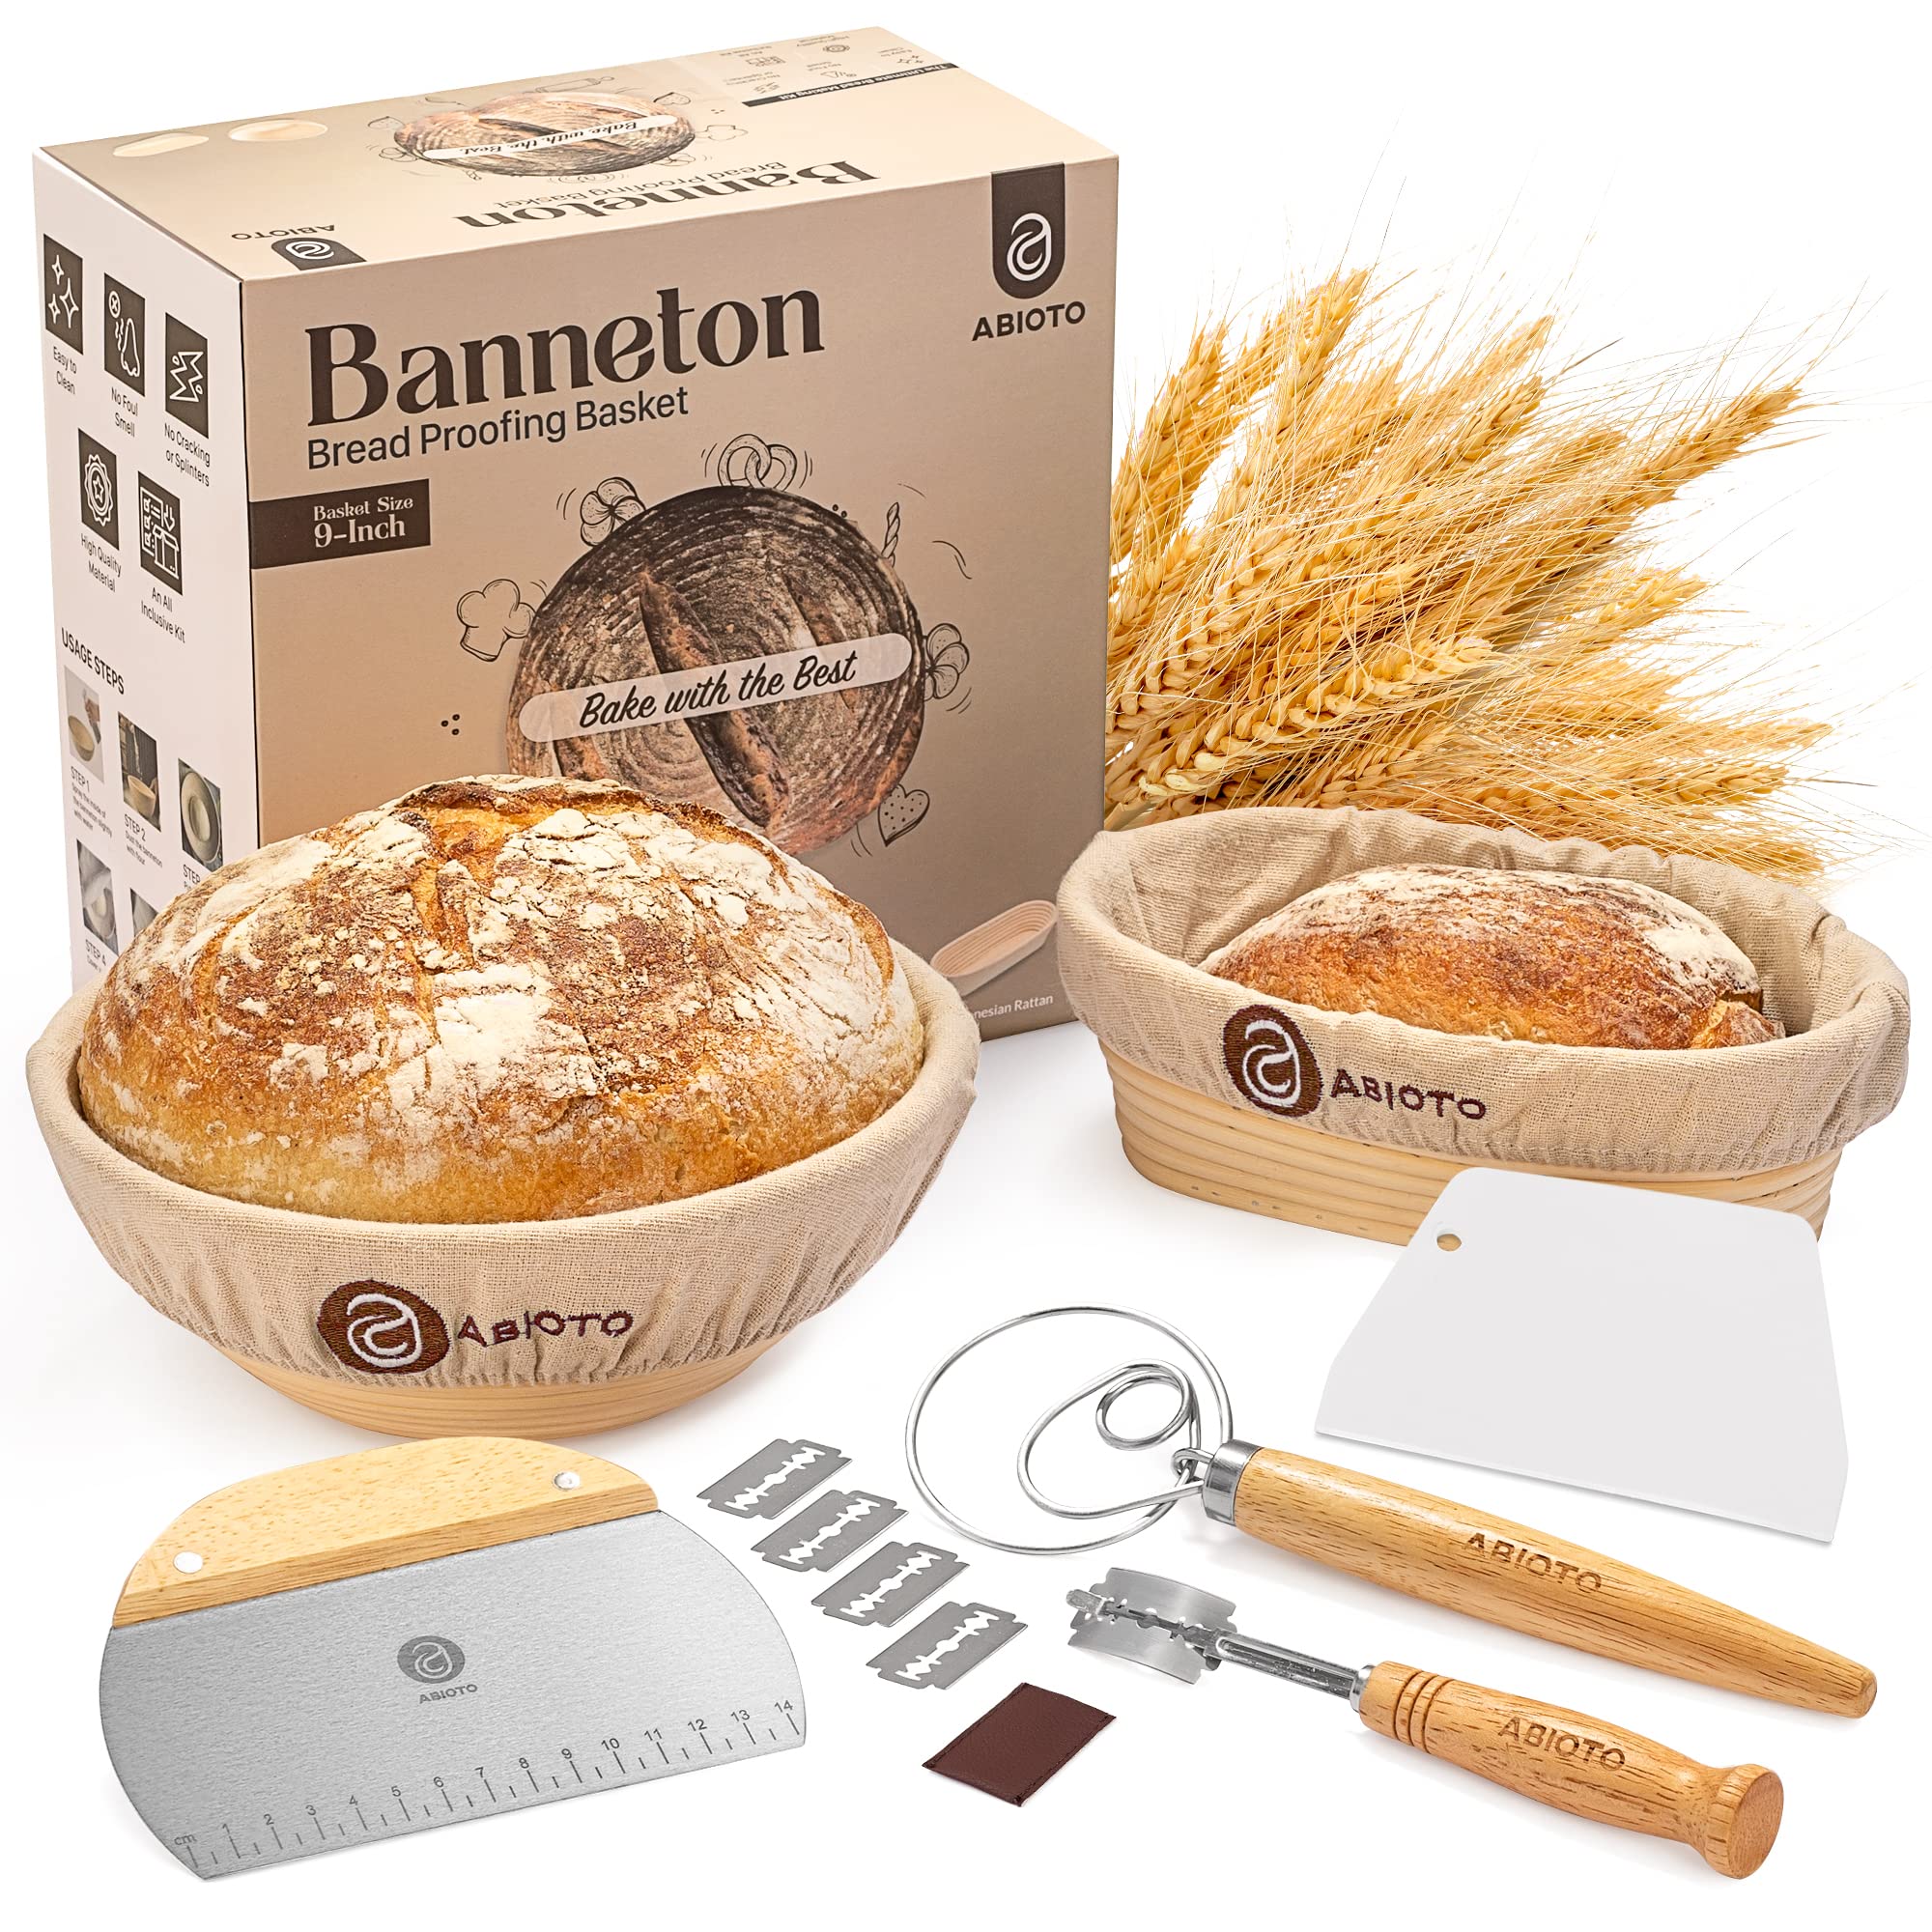 Banneton Bread Proofing Basket Set of 2 with Sourdough Bread Baking Supplies - A Complete Bread Making Kit Including 9